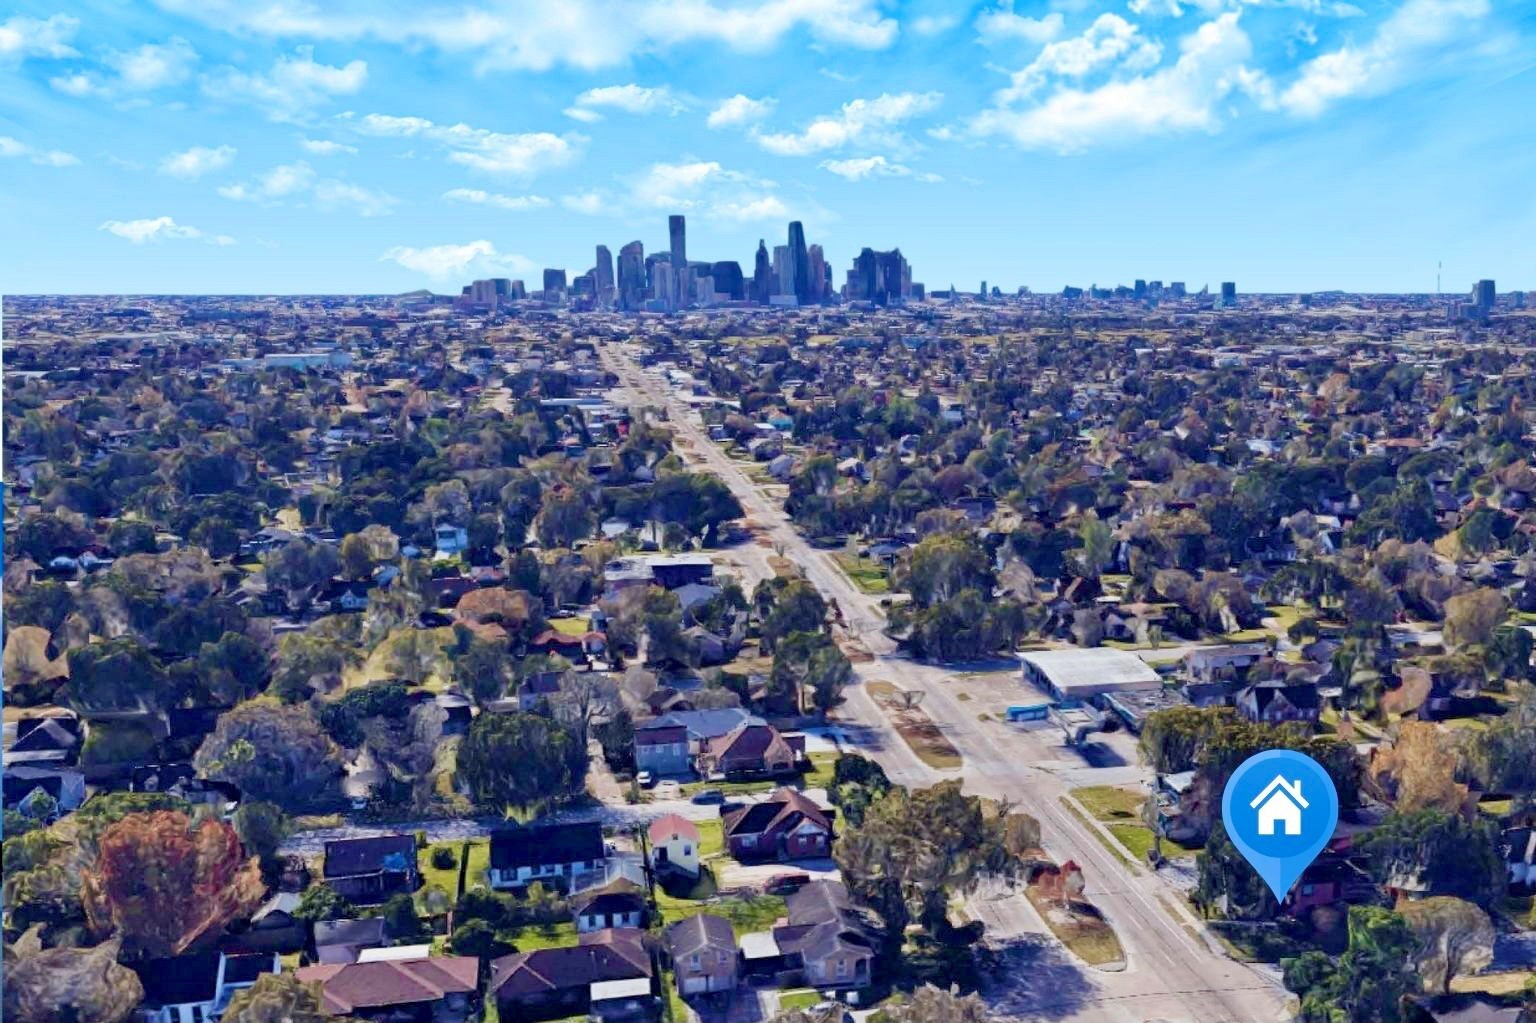 Aerial view from 5811 Irvington looking toward downtown Houston.